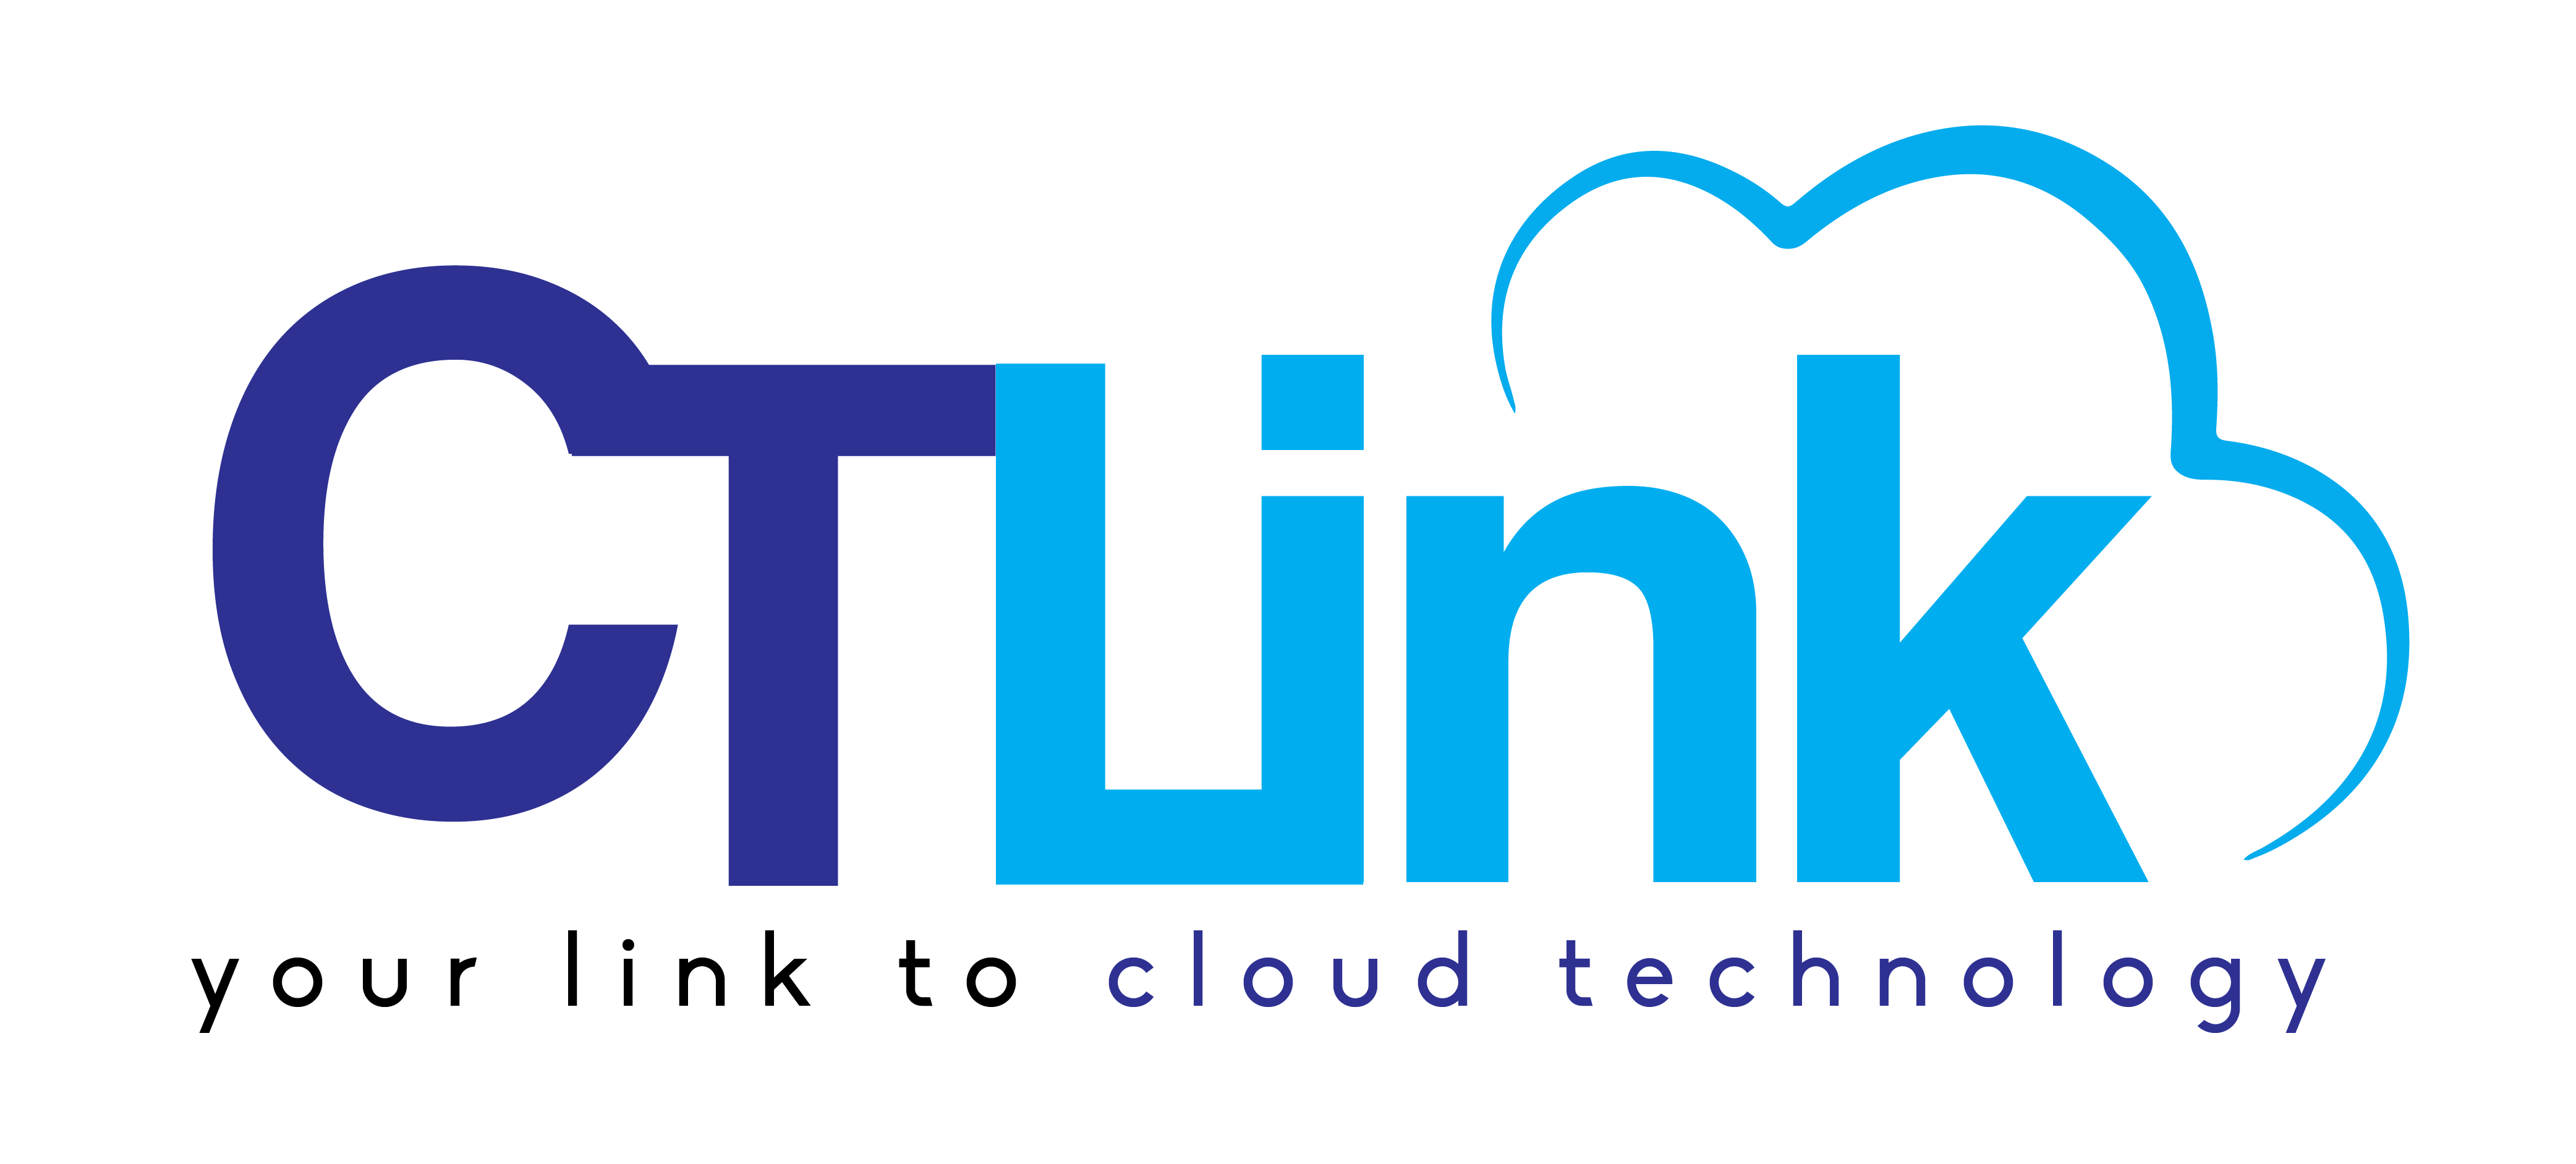 Cloud Company Logo - CT Link launches a new Company Logo – CT Link Systems, Inc.